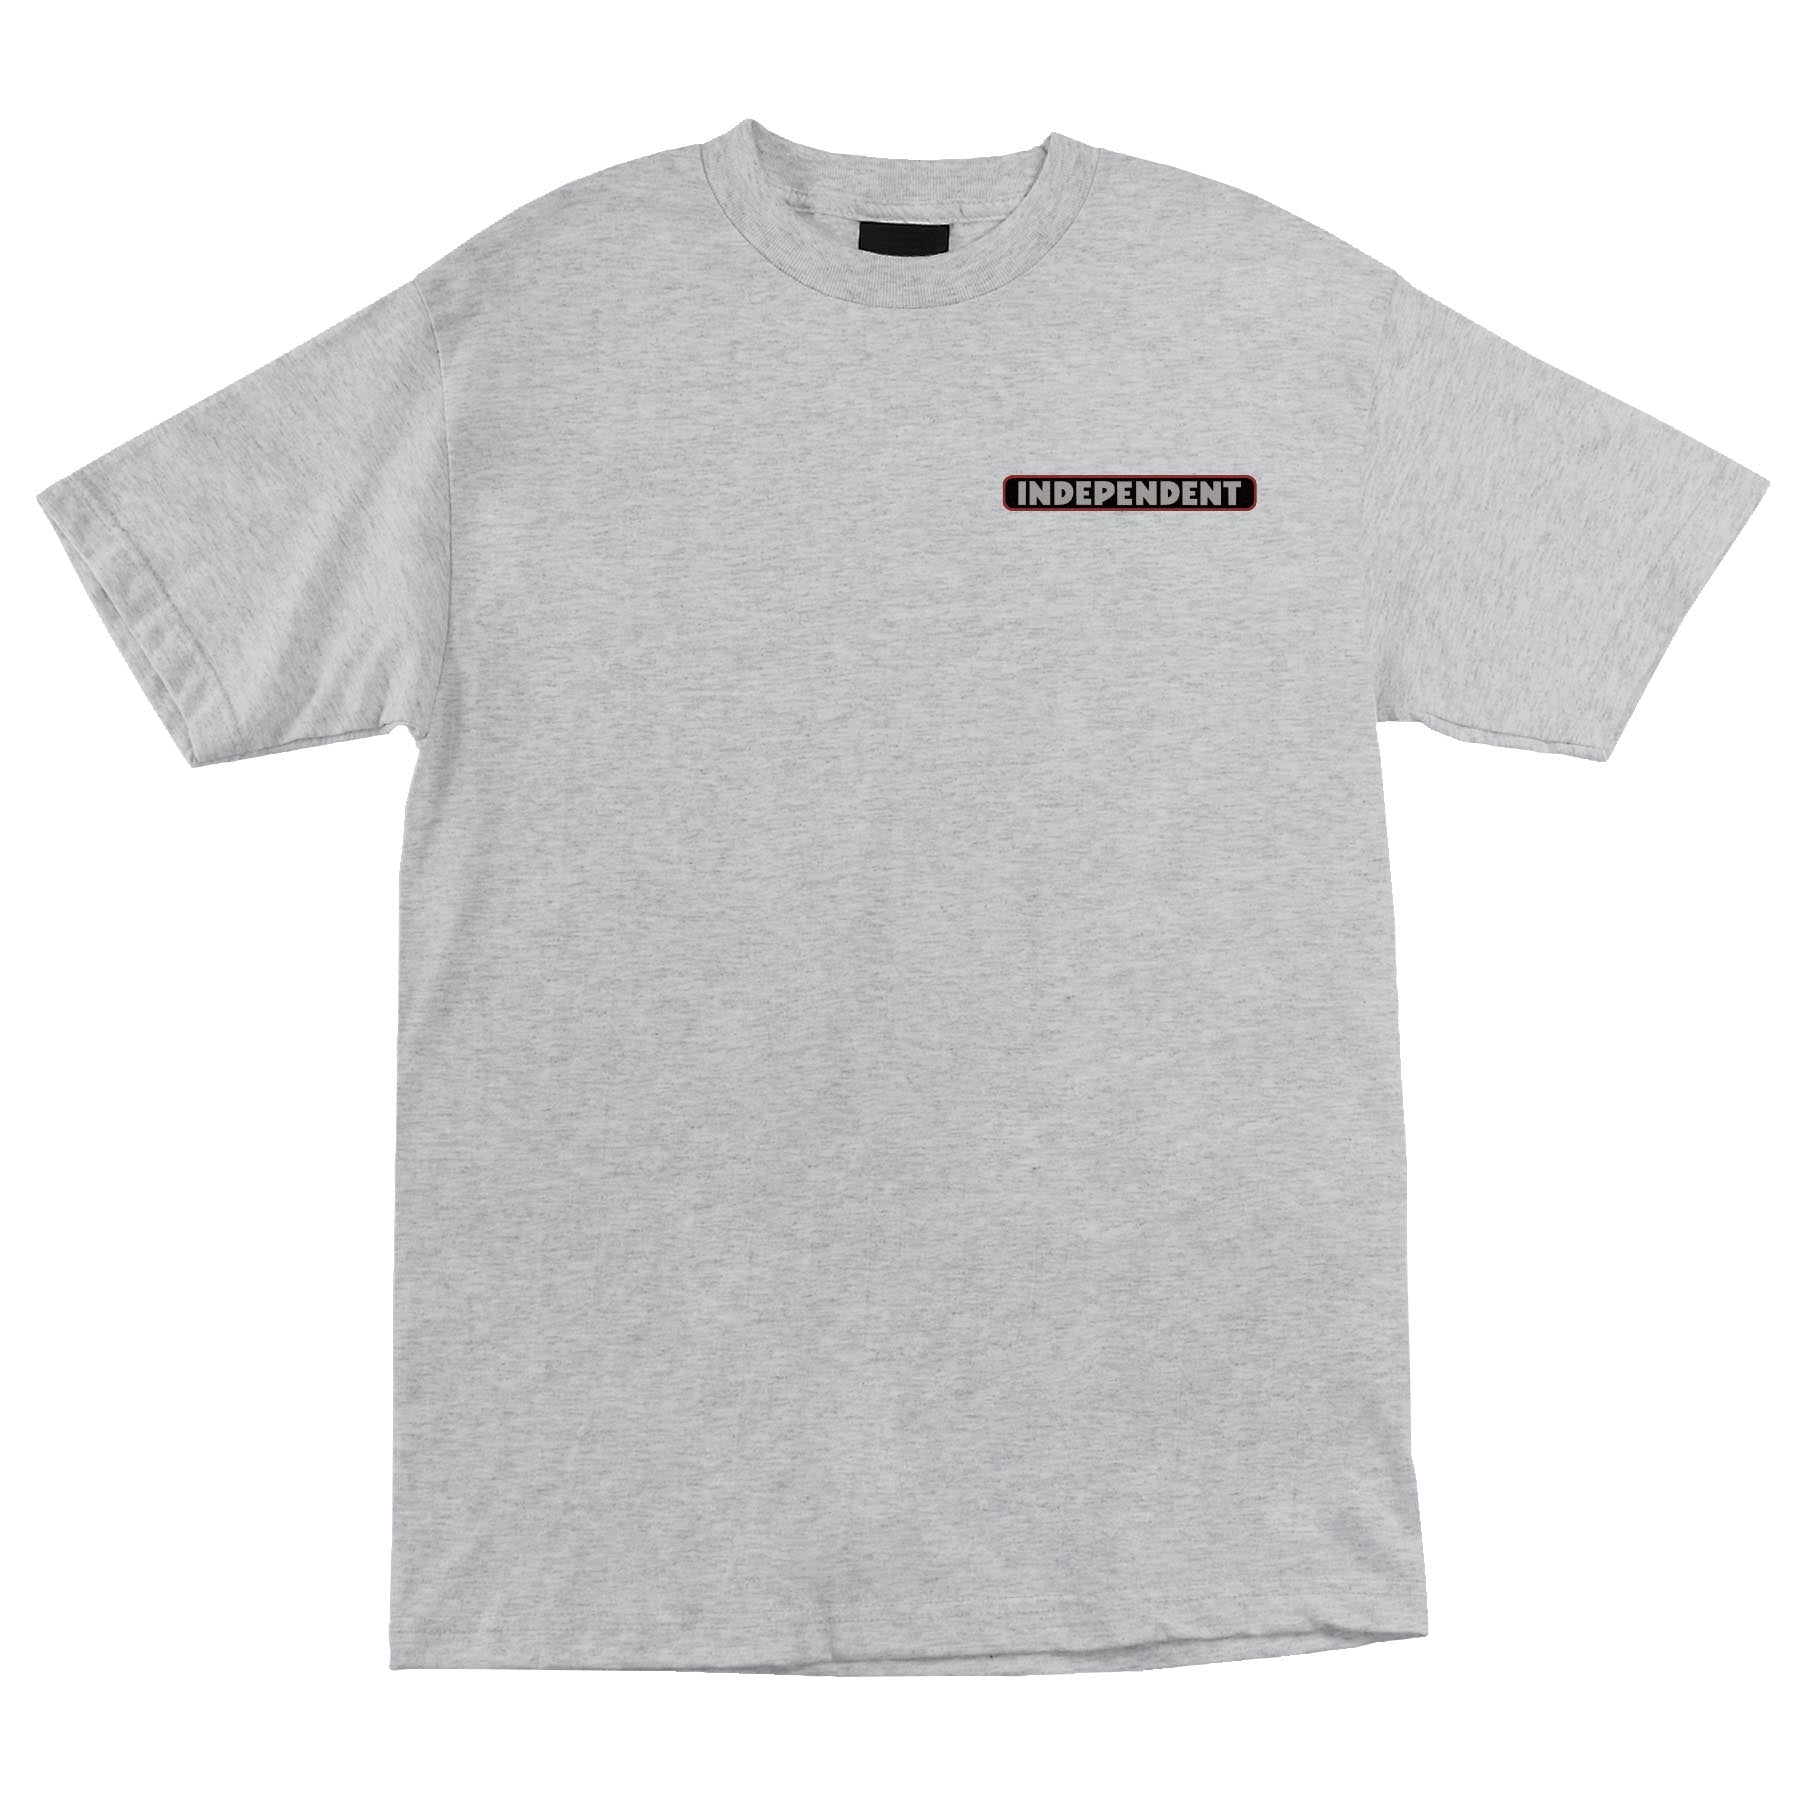 Independent ITC Profile S/S T-Shirt - Heather Grey